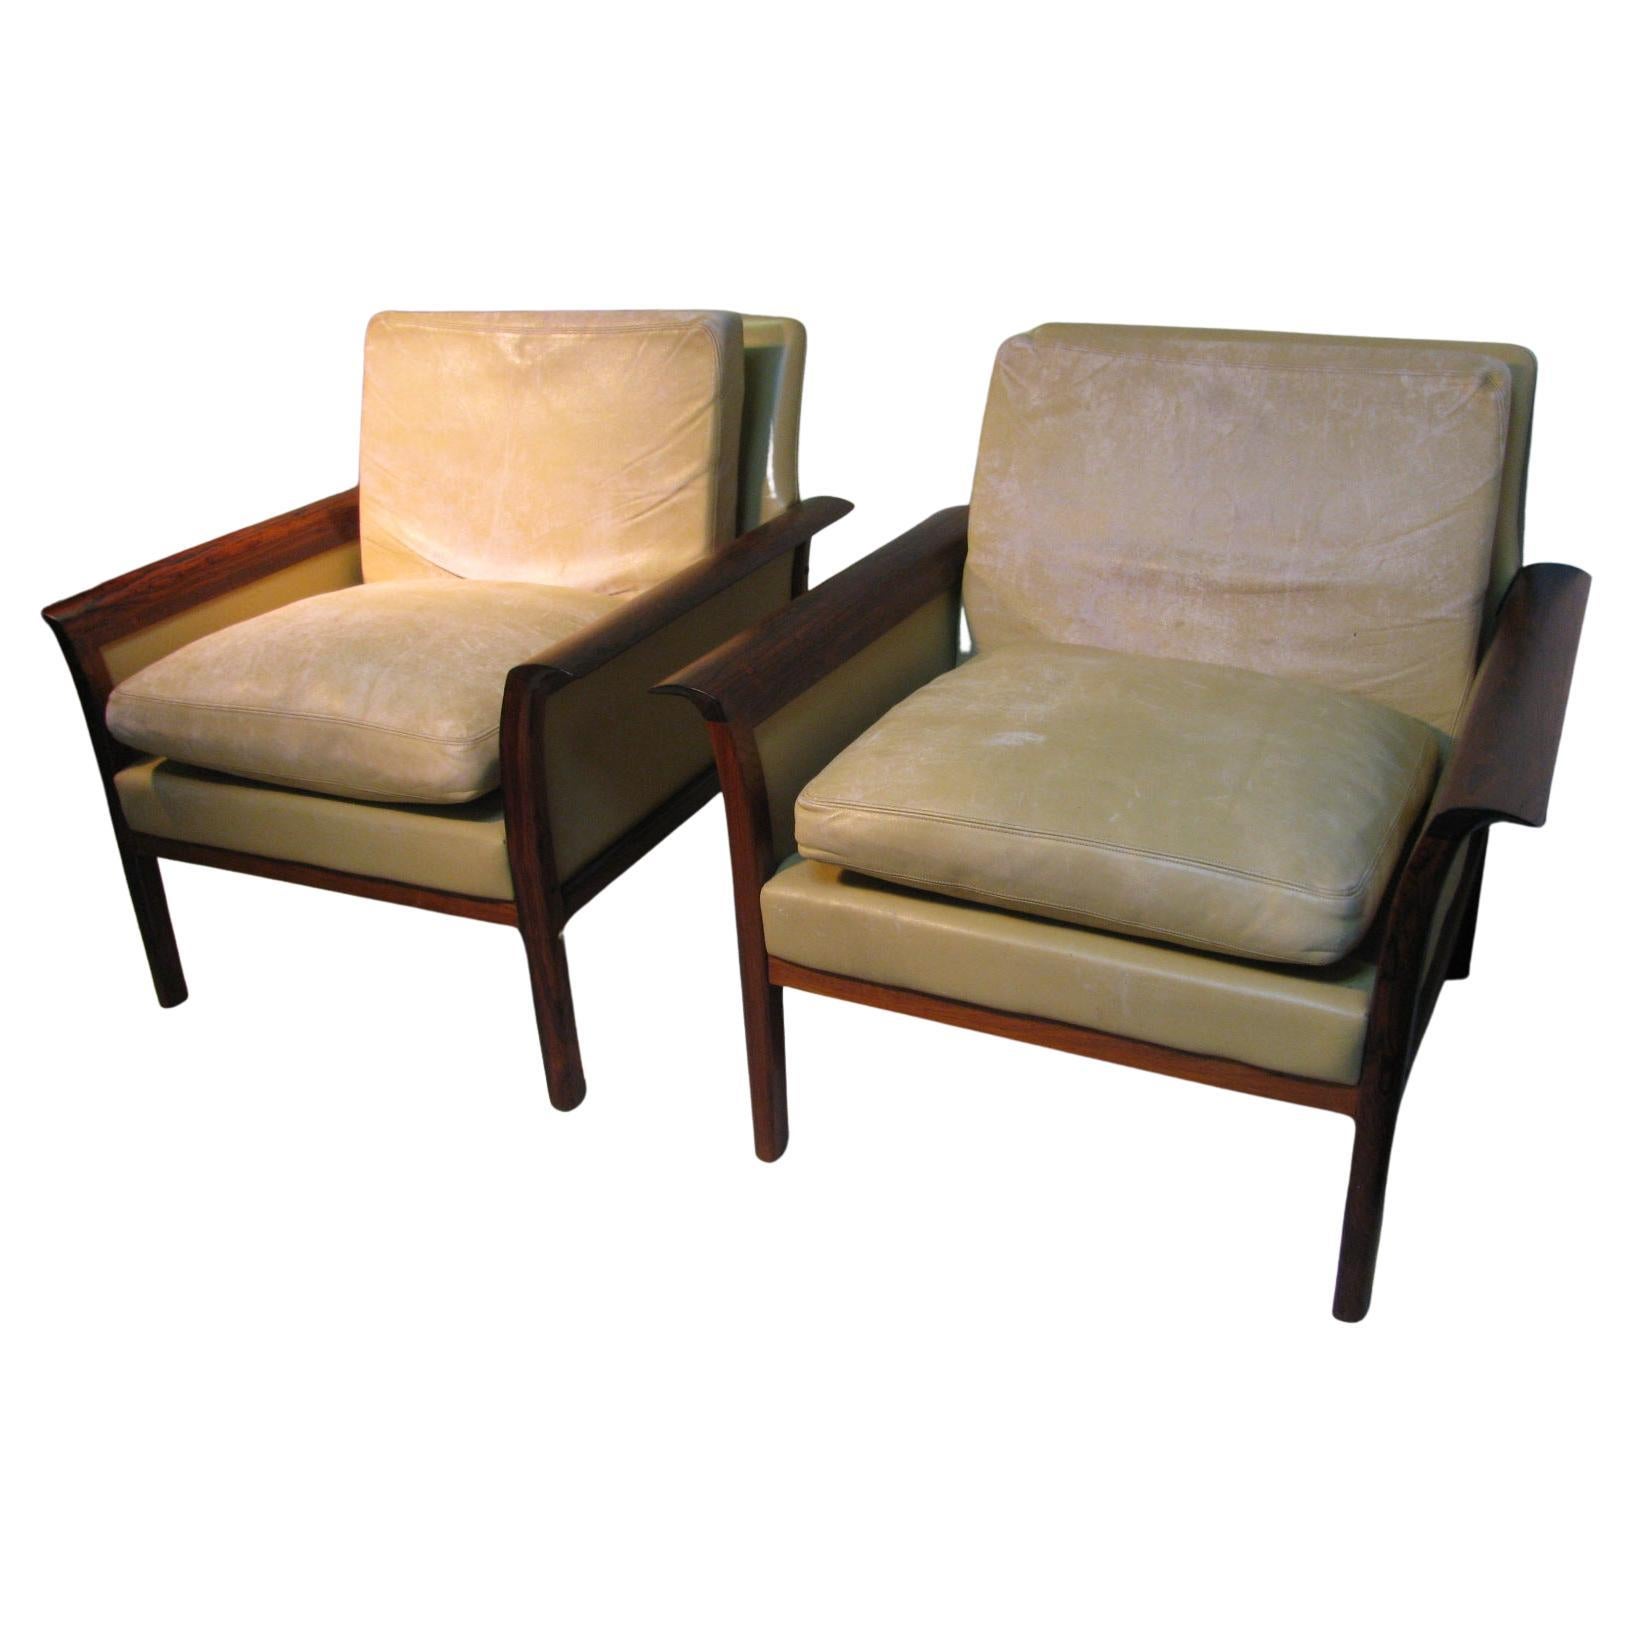 Norwegian Mid-Century Modern Leather & Rosewood Lounge Chairs Knut Saeter for Vatne Mobler For Sale